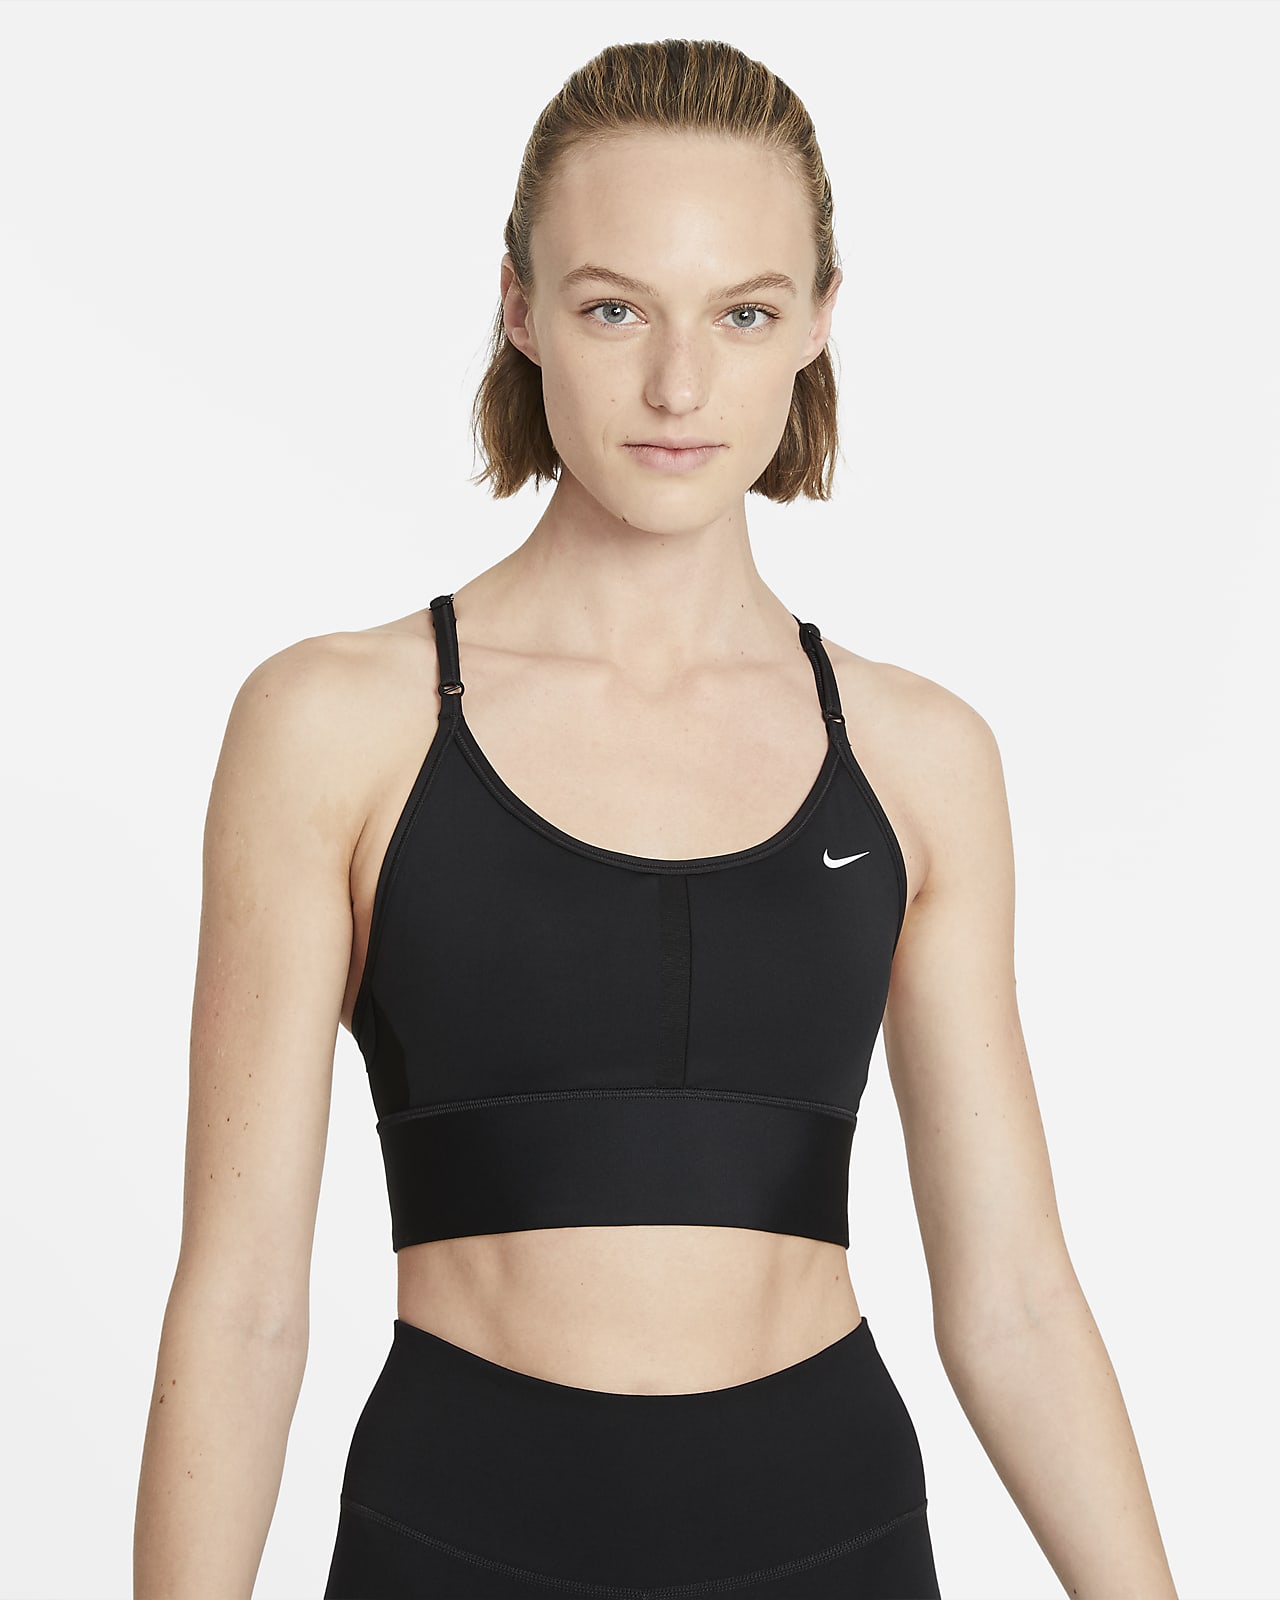 https://static.nike.com/a/images/t_PDP_1280_v1/f_auto,q_auto:eco/68d1521d-2e4c-4b98-bea4-f8d9fca9bba0/indy-womens-light-support-padded-longline-sports-bra-kD7080.png